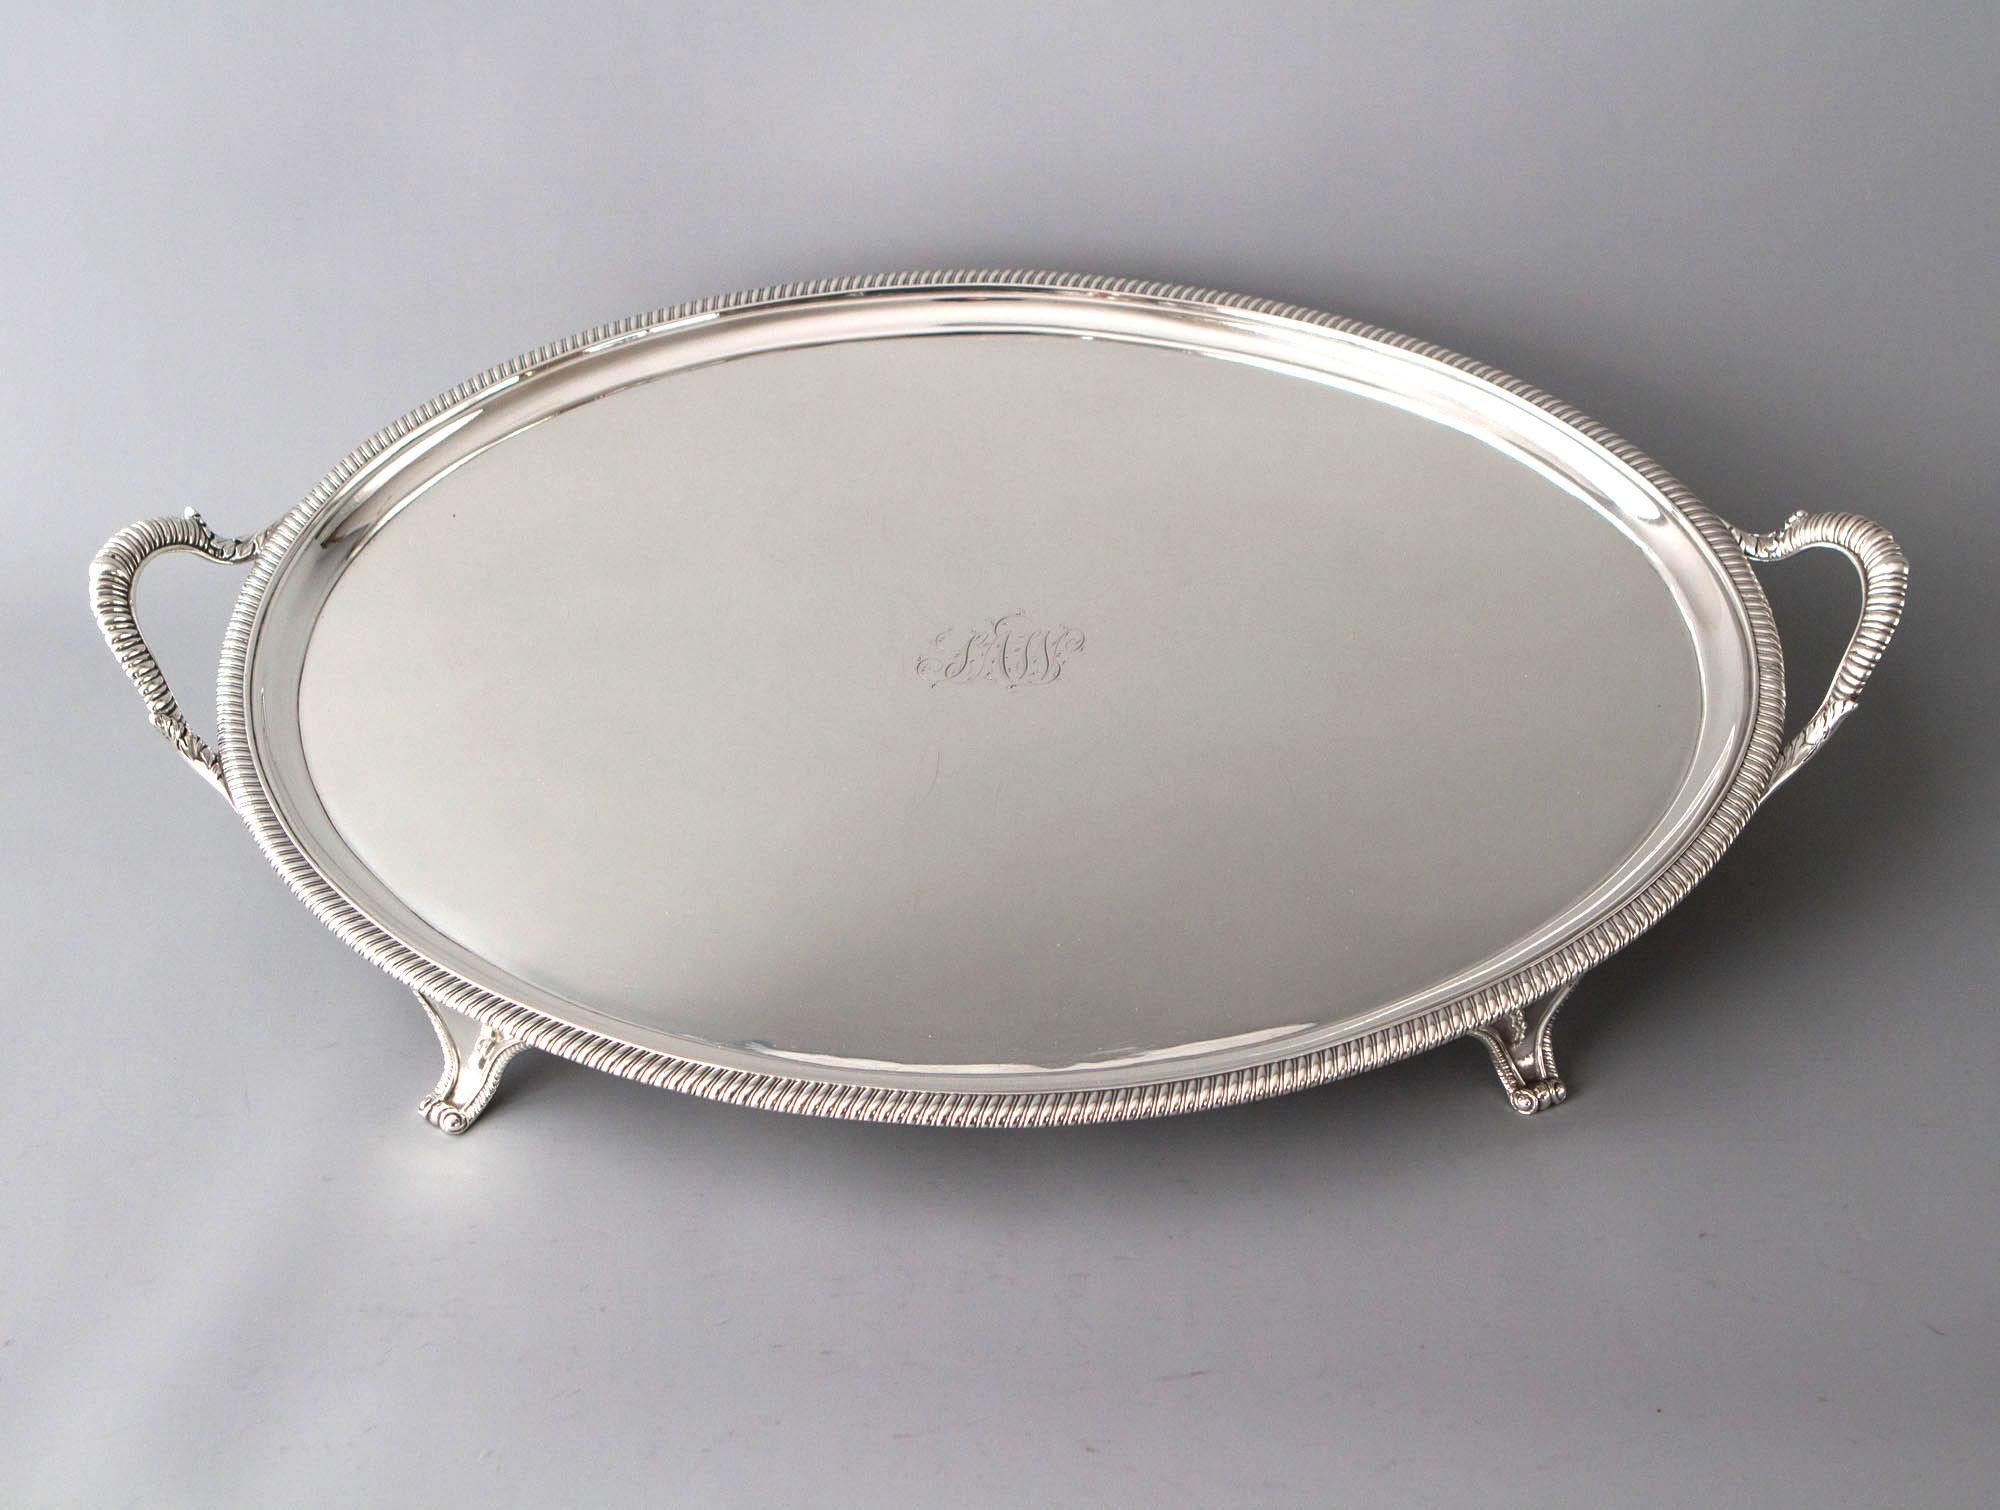 A very good quality George III oval silver tray with twin handles and gadrooned edges. The whole standing on four scrolled panel feet.
 
Clearly marked to the underside for London 1811 by Peter and William Bateman.
 
This is an exceptionally